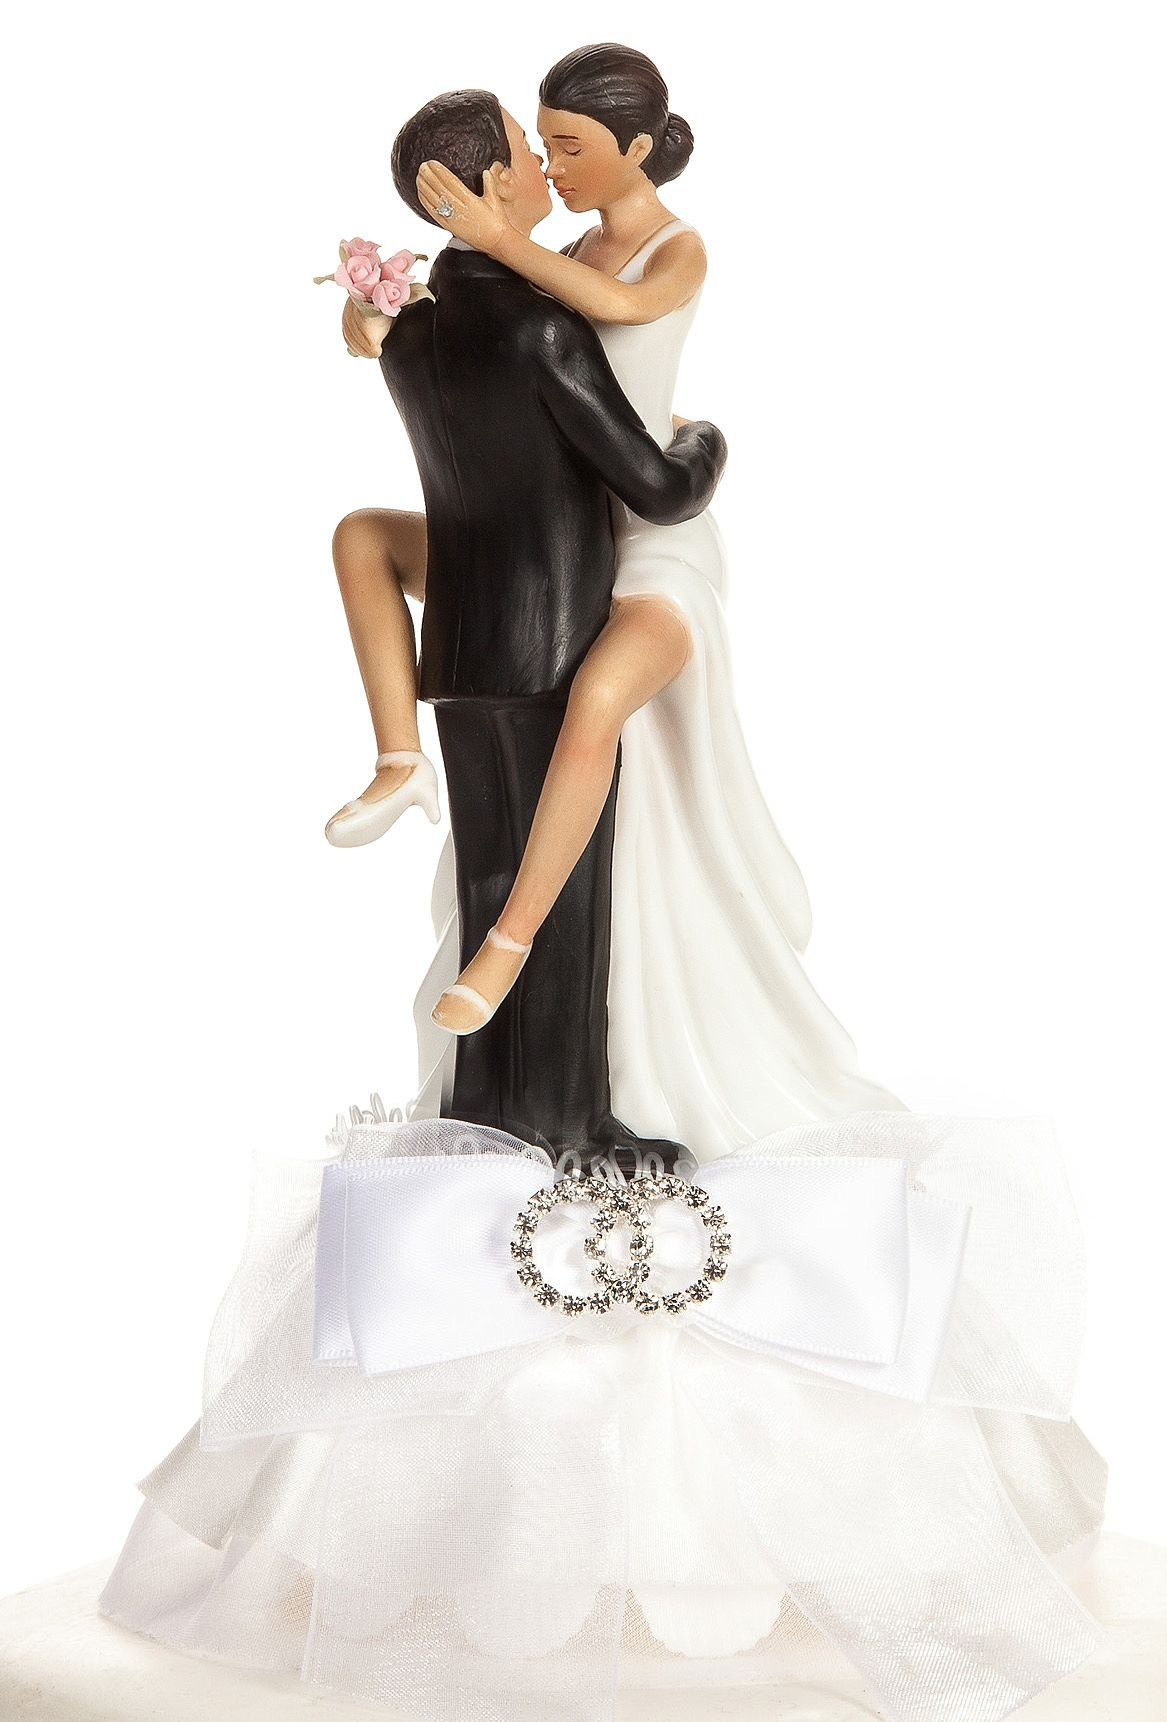 African American Cake Toppers For Wedding Cakes
 Funny y Rhinestone African American Wedding Rings Cake